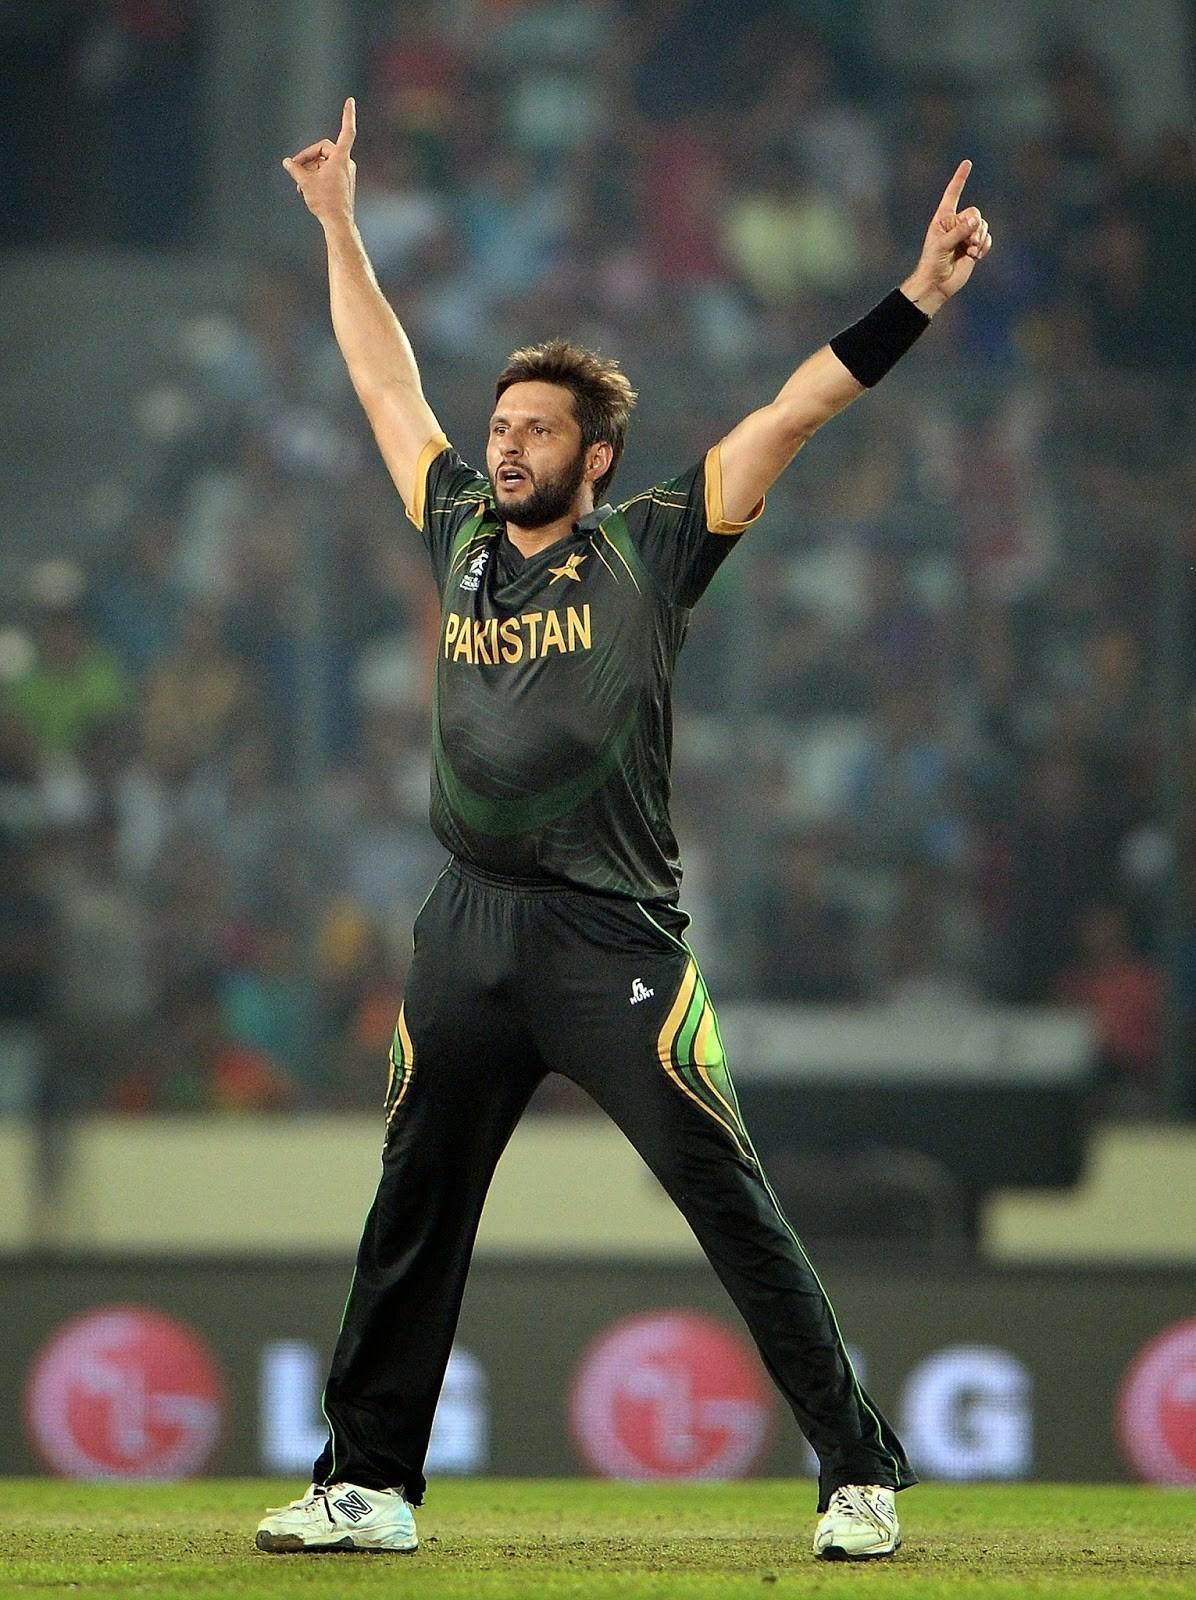 Shahid Afridi Wallpaper: Pakistan Wallpaper for Android